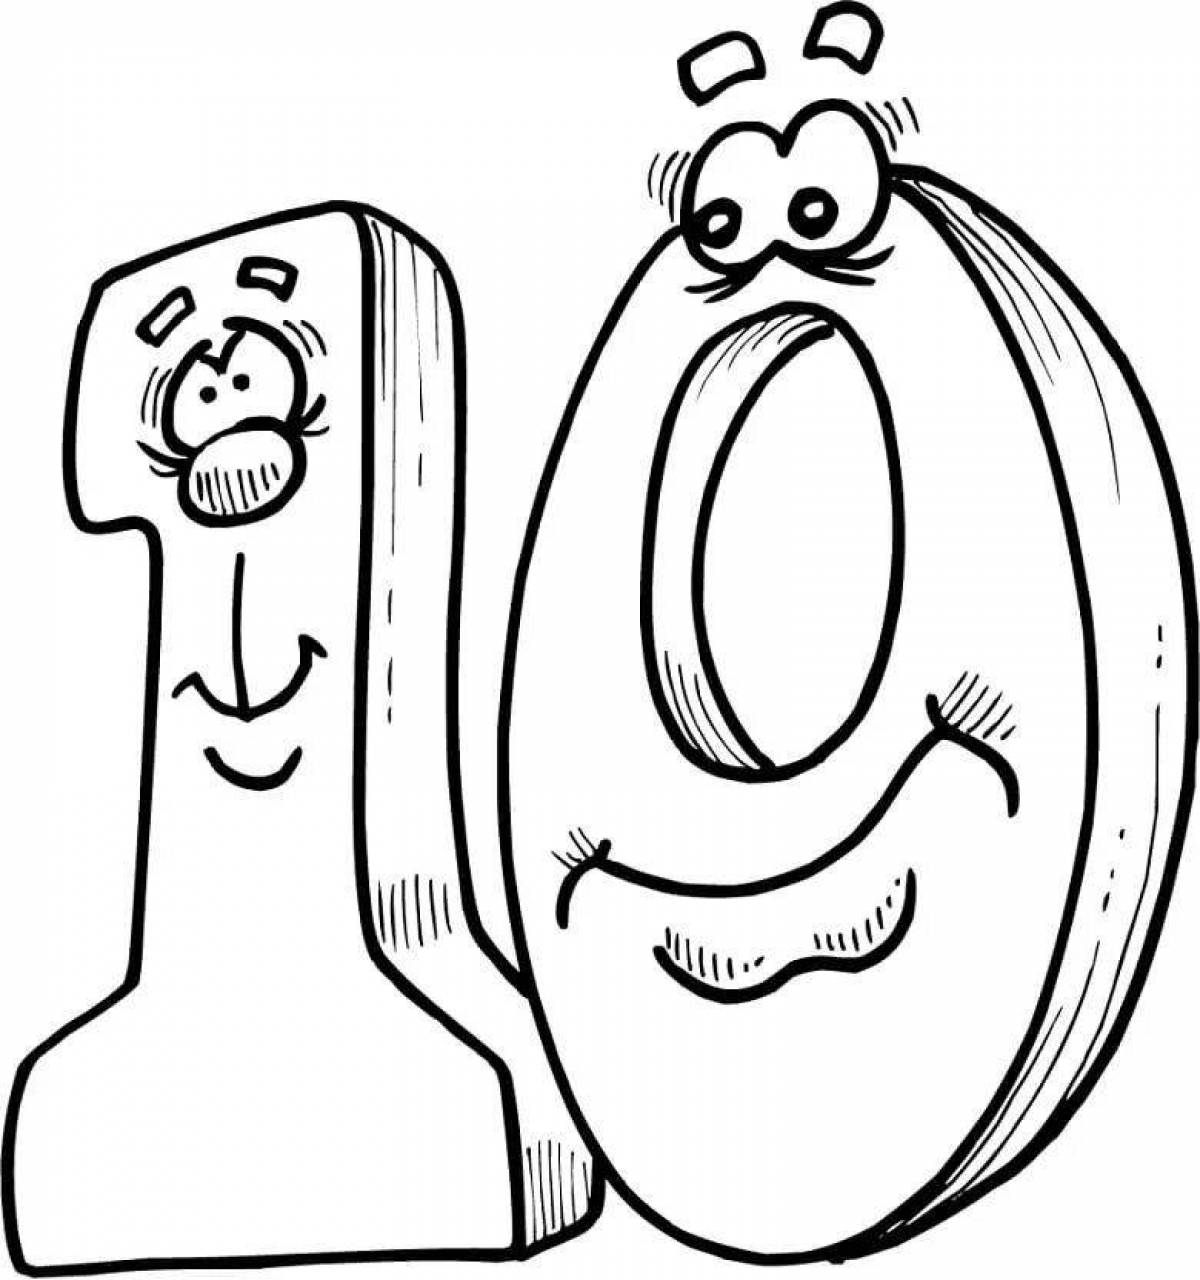 Bold 0 digit coloring page